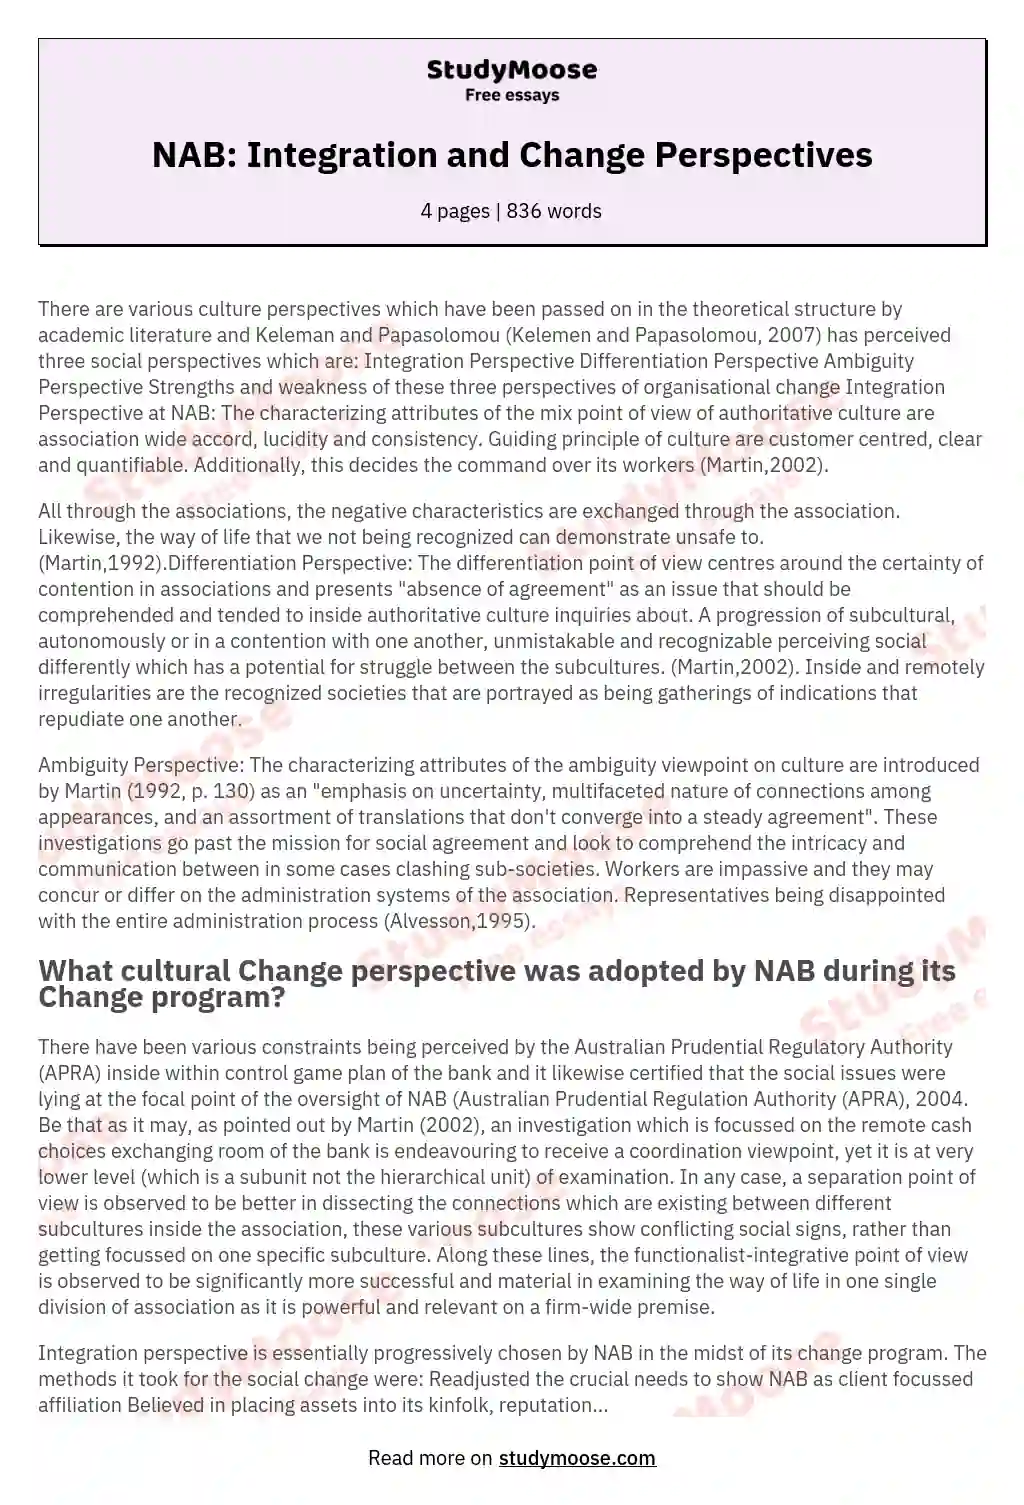 NAB: Integration and Change Perspectives